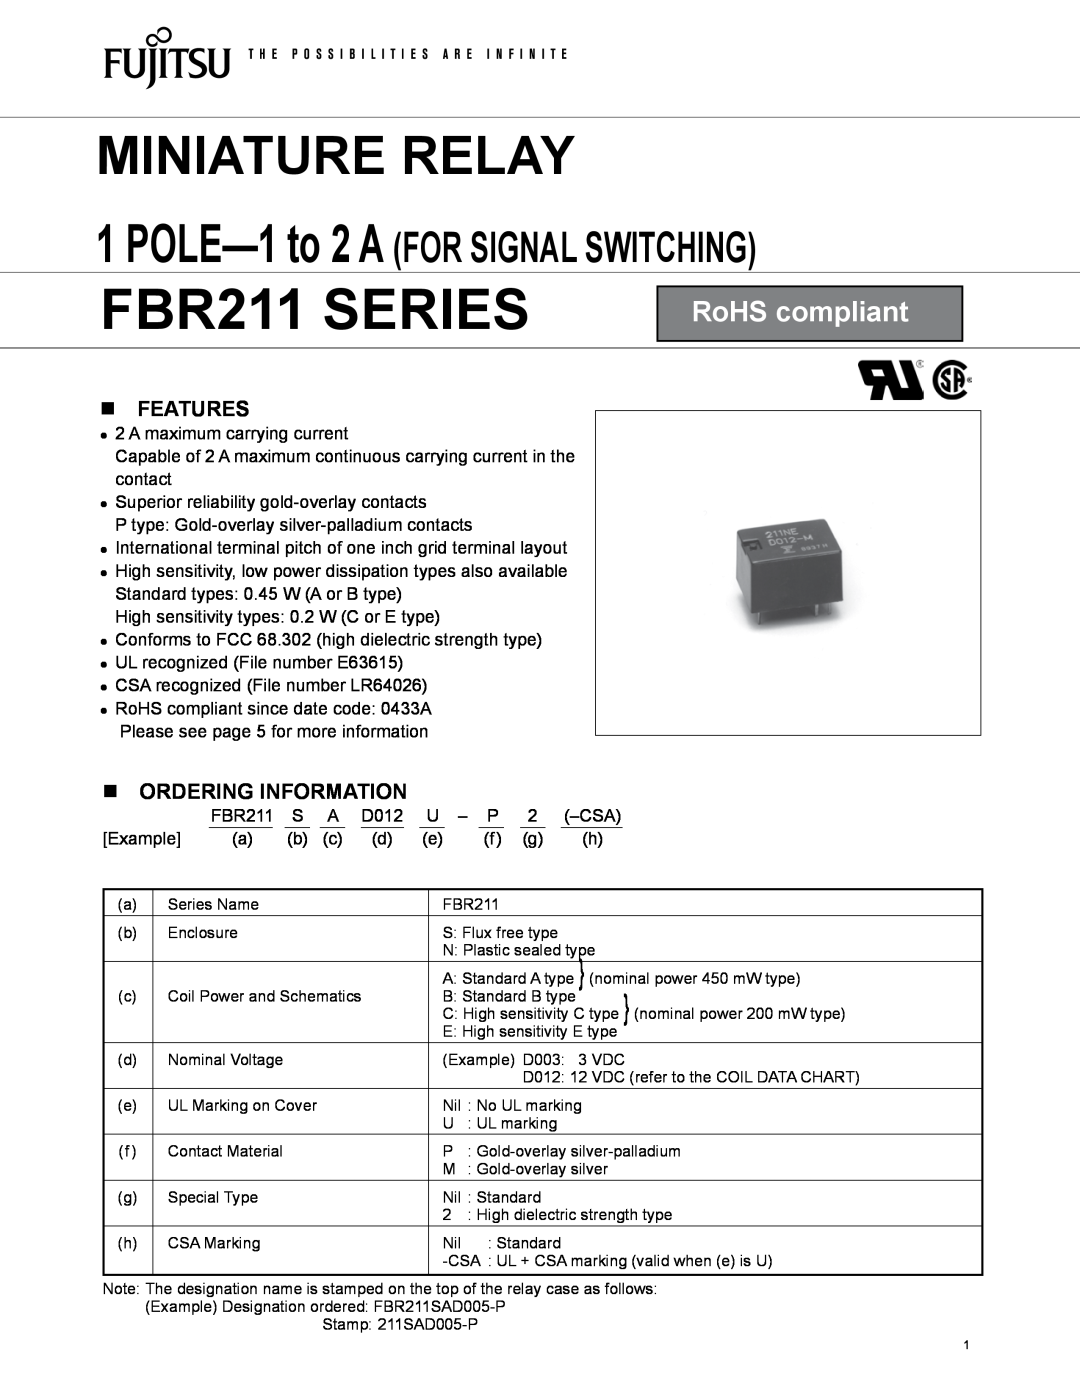 Fujitsu manual nFEATURES, nORDERING INFORMATION, FBR211 SERIES, Miniature Relay, POLE-1to 2 A FOR SIGNAL SWITCHING 